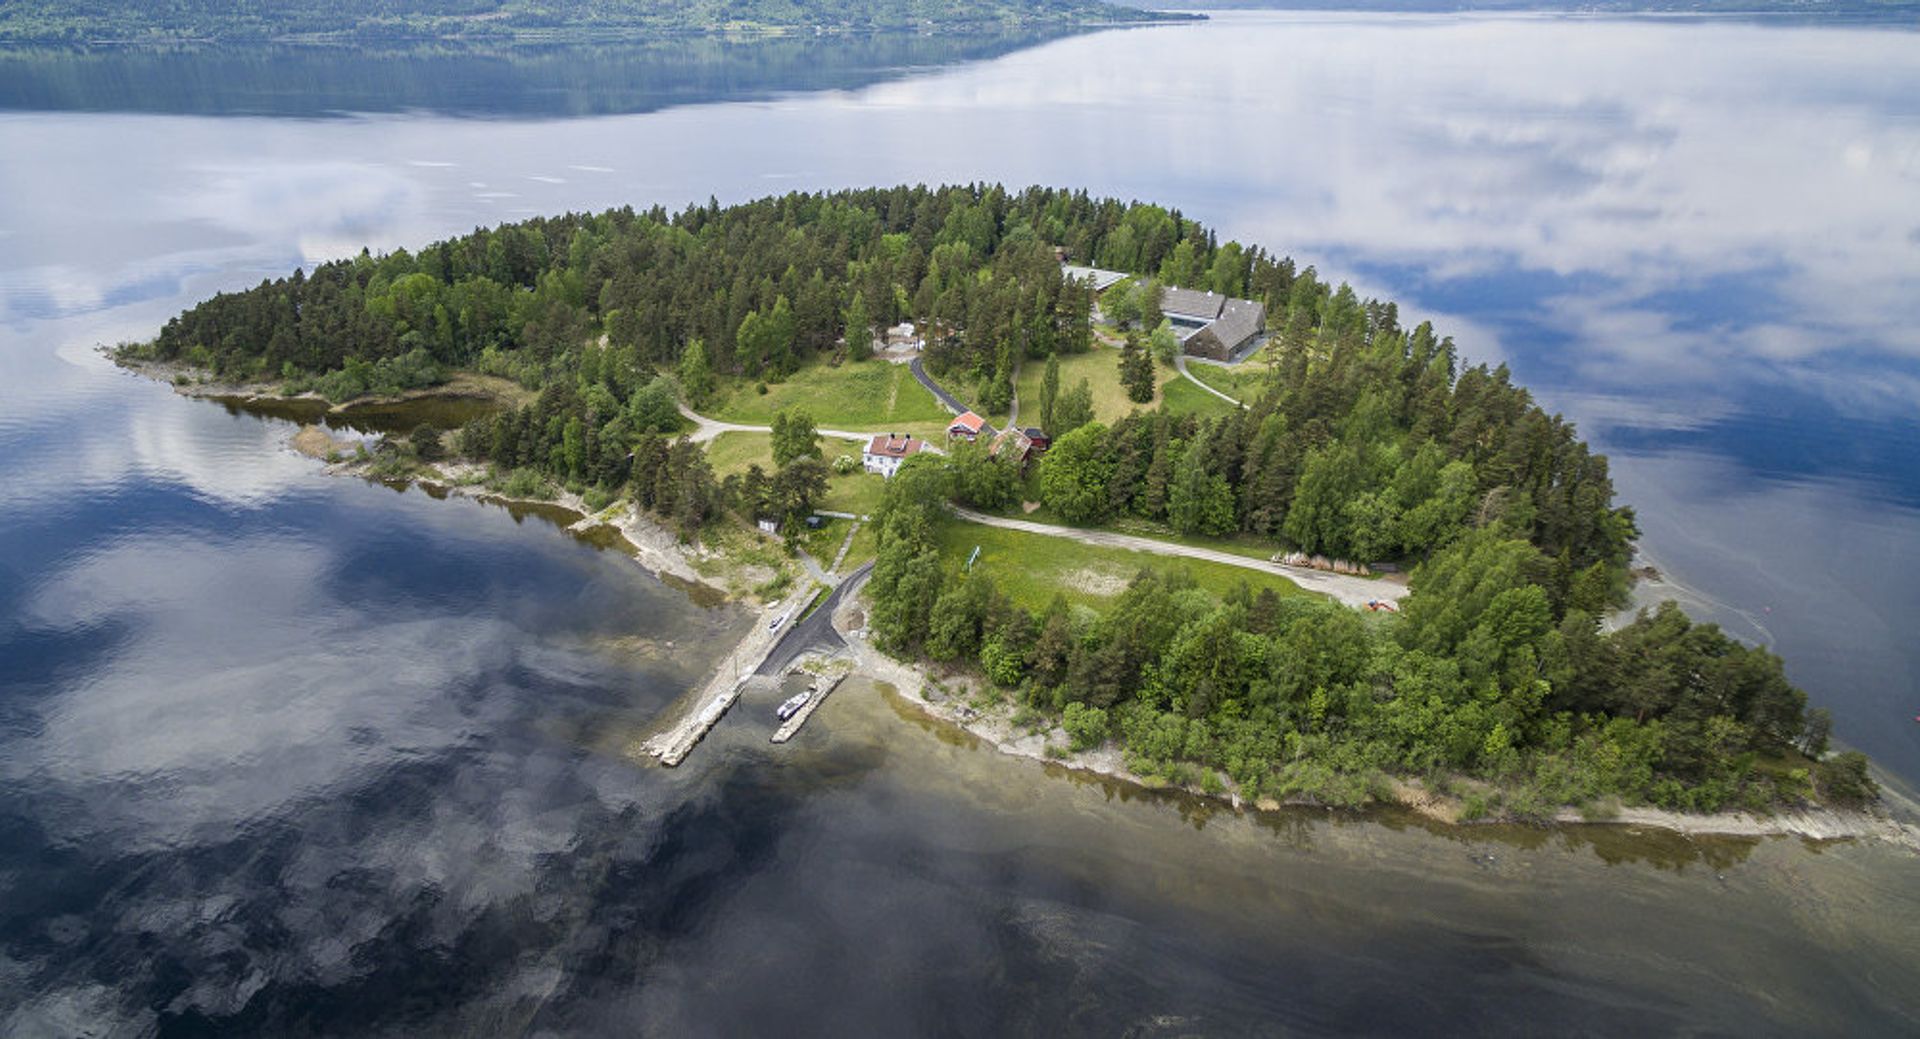 Anders Behring Breivik killed 77 people in two attacks in Oslo and on the island of Utøya (pictured) in July 